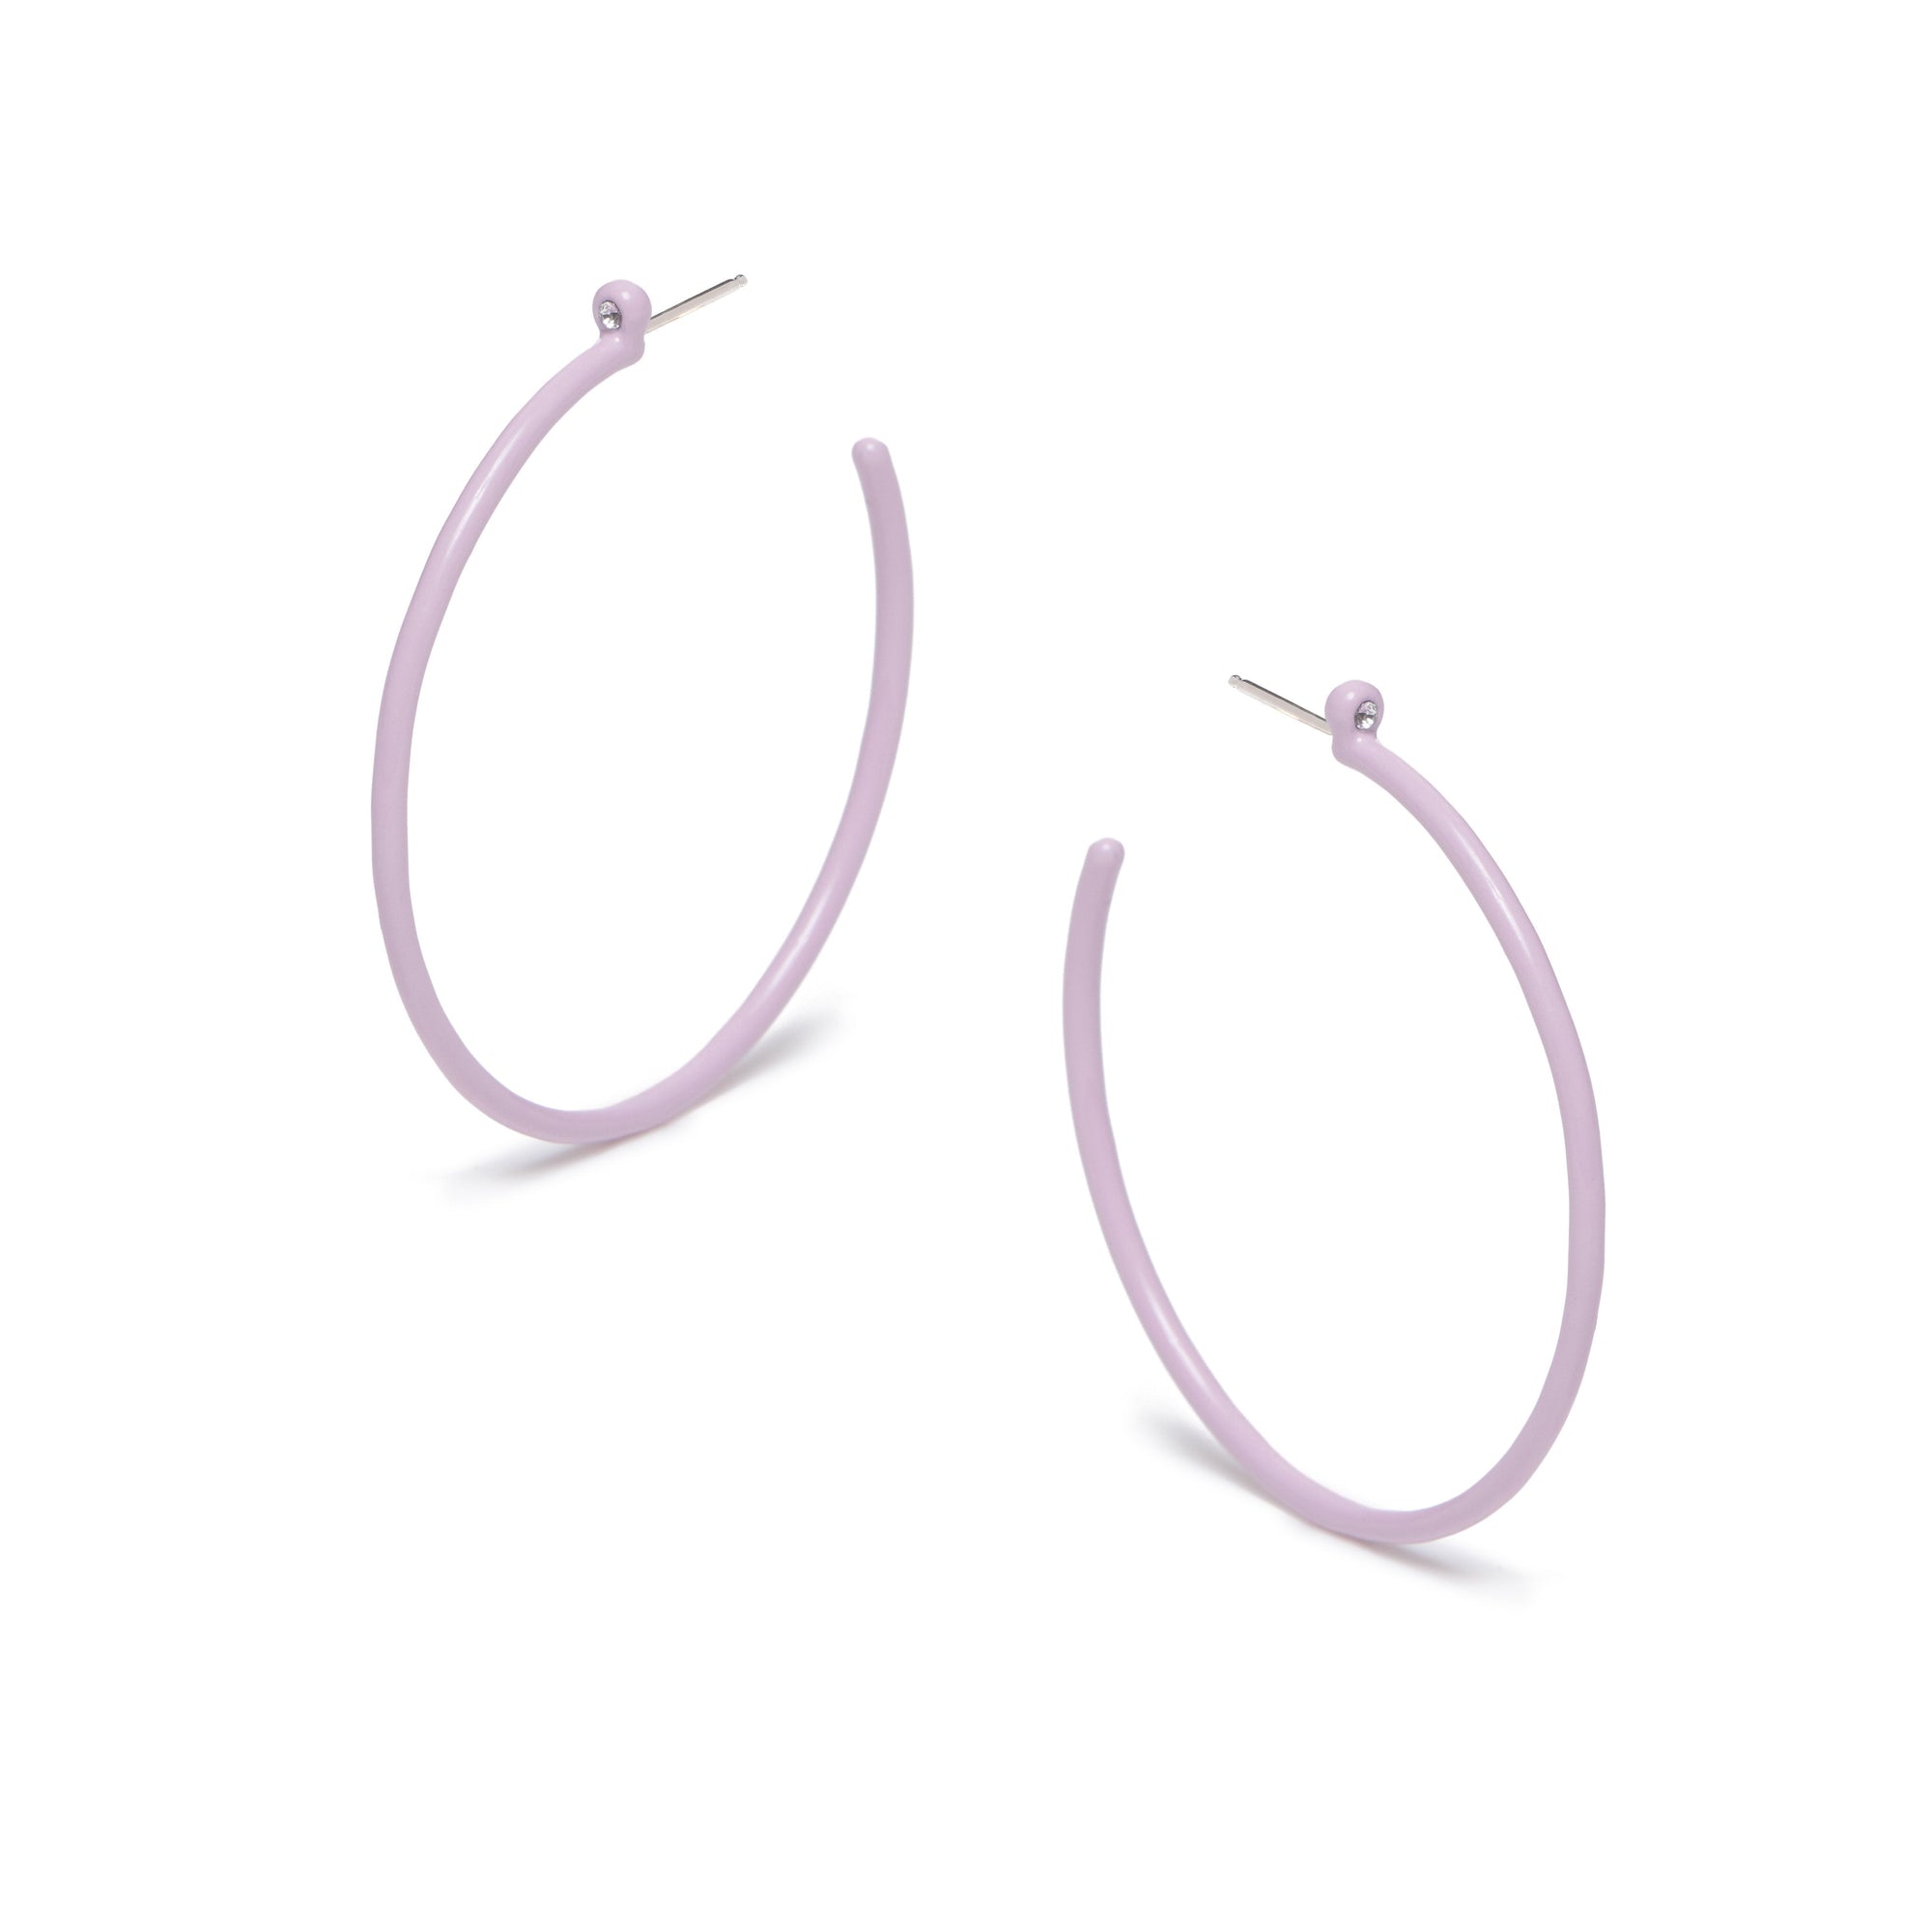 Tinsley Hoops in Lavender - SPRING CLEANING